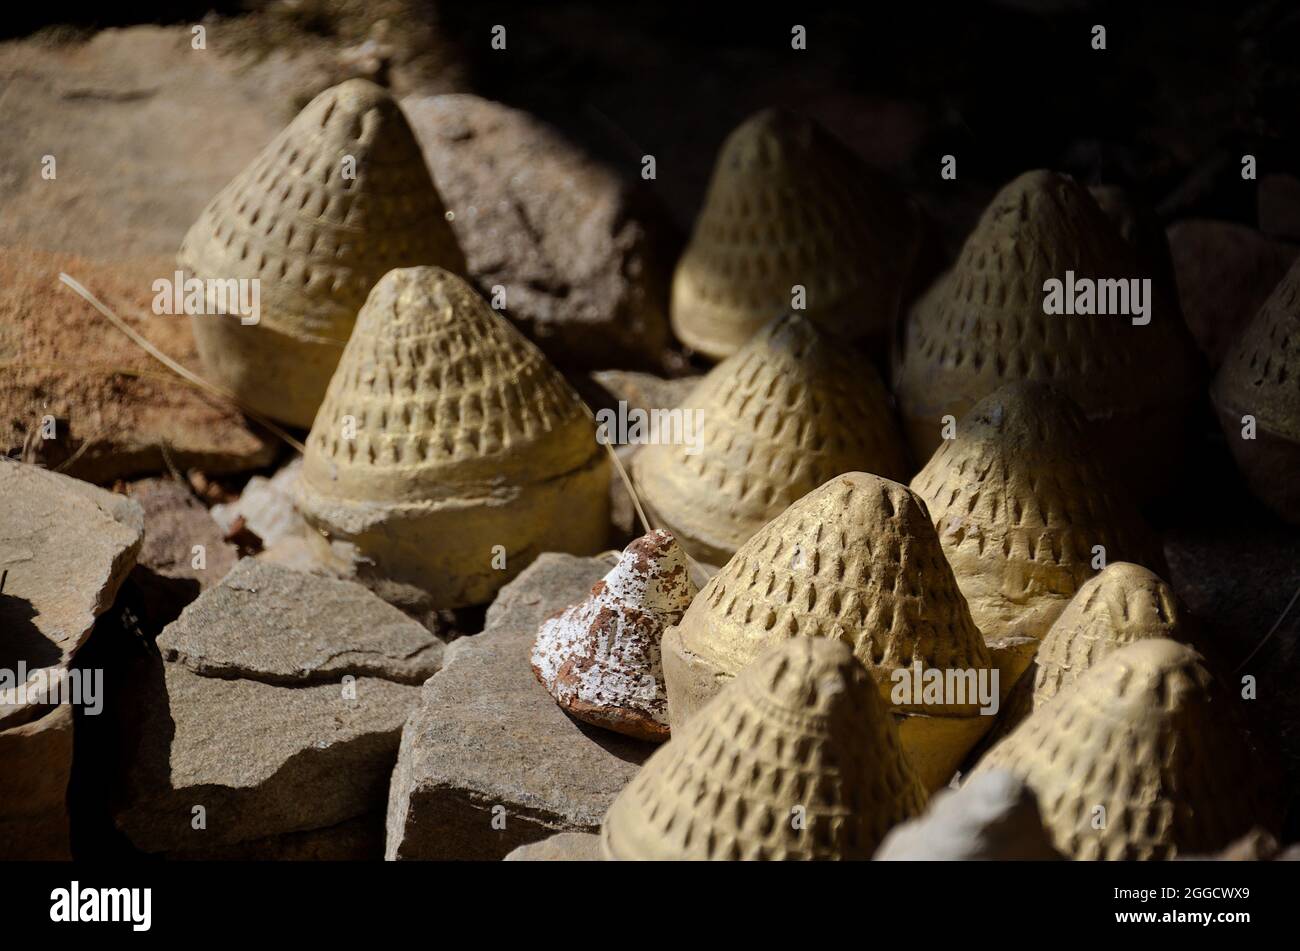 Close-up of Tsa-Tsas: clay votives in the shape of cylindrical cones or stupas, placed along the Paro Taktsang (Tiger Nest's) trail, Bhutan Stock Photo